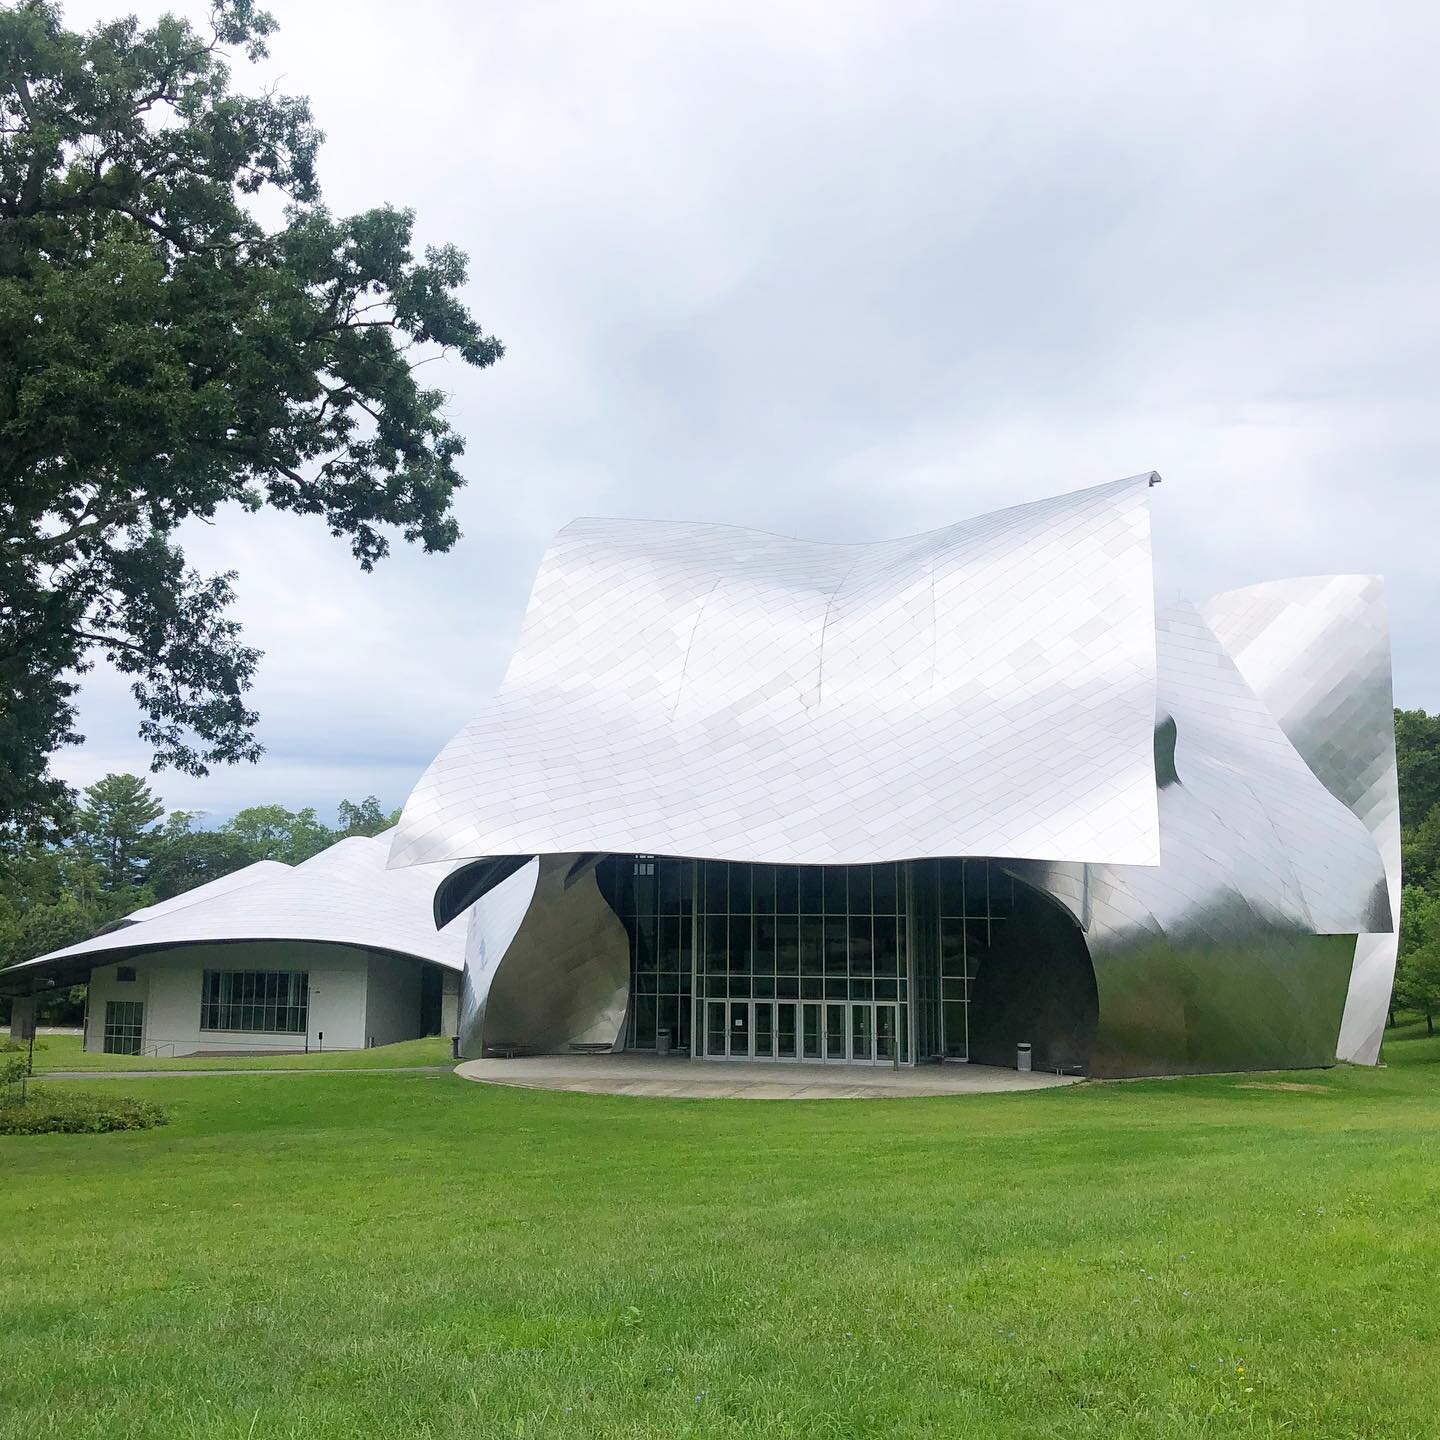 Bard College drop off today!
Thanks Frank Gehry&hellip; I never get tired of the @fishercenterbard. The gallery IS open though until 5:00. #artiseverywhere #fishercenter #performingarts #bardcollege #artontheroad #architecture #artandarchitecture art